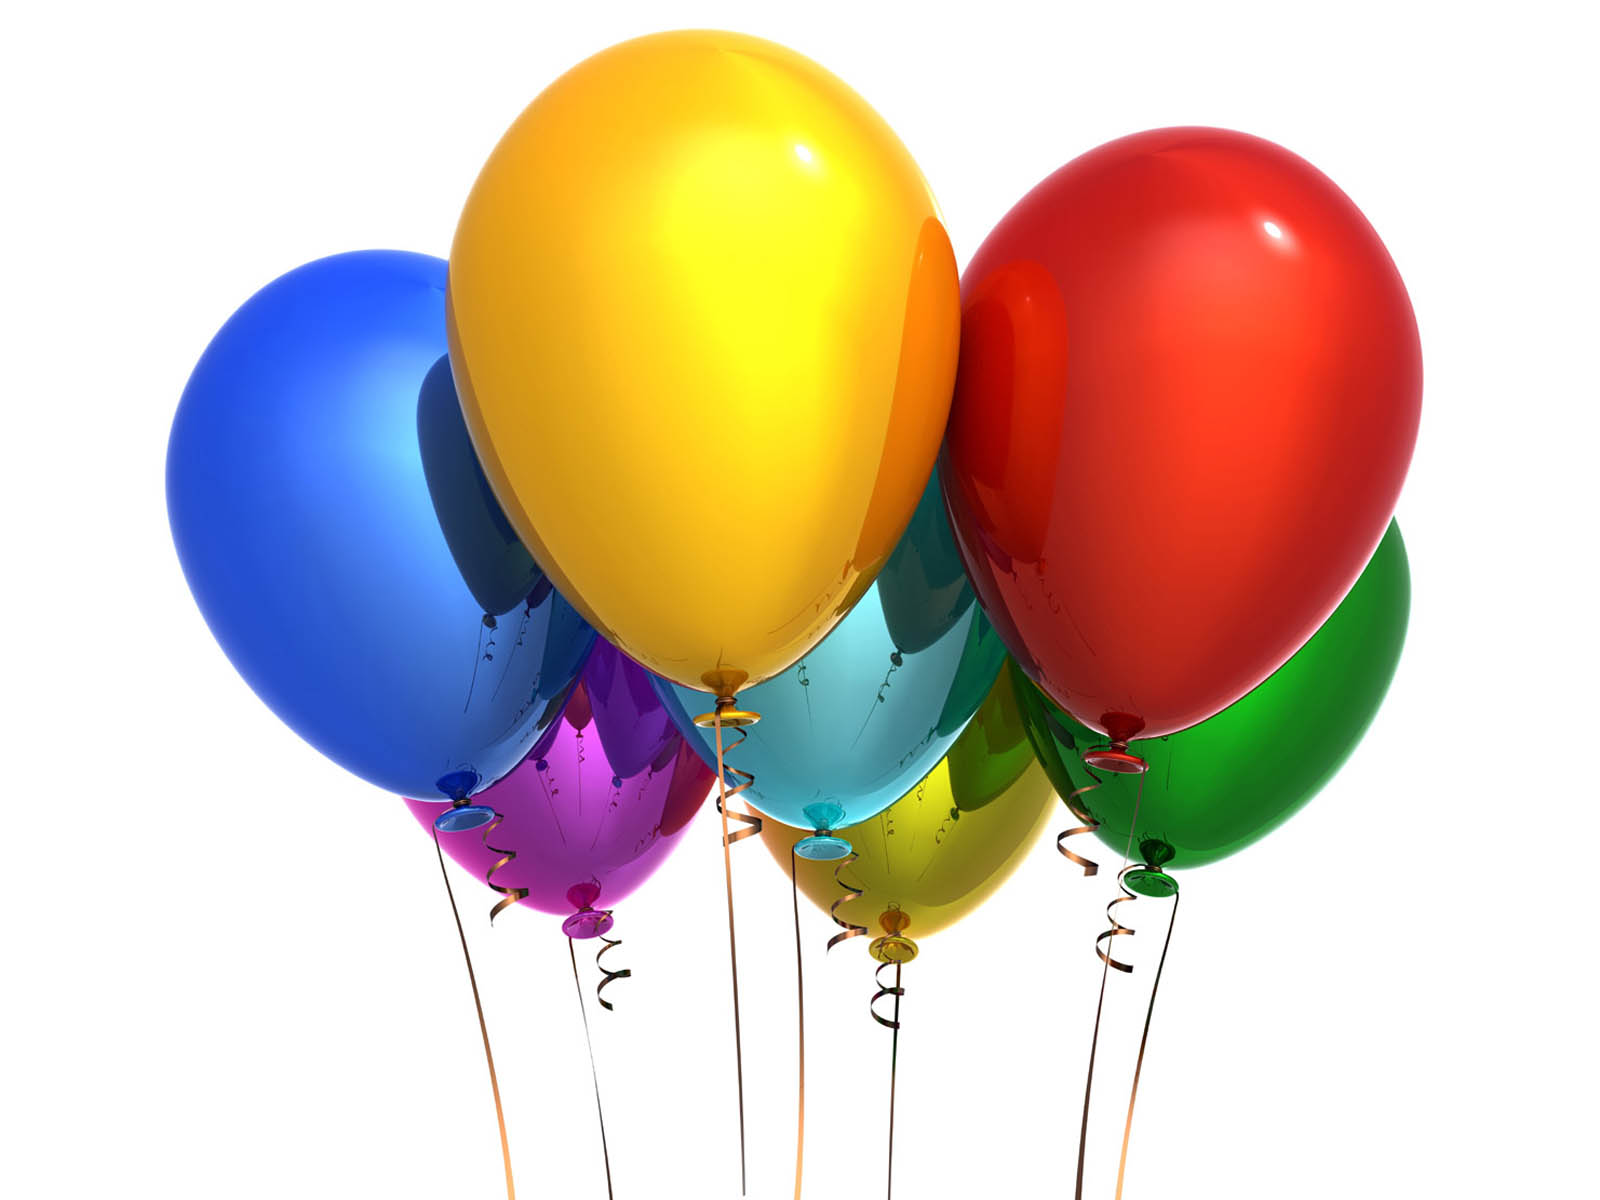 Balloons Wallpaper Image Photos Pictures And Background For